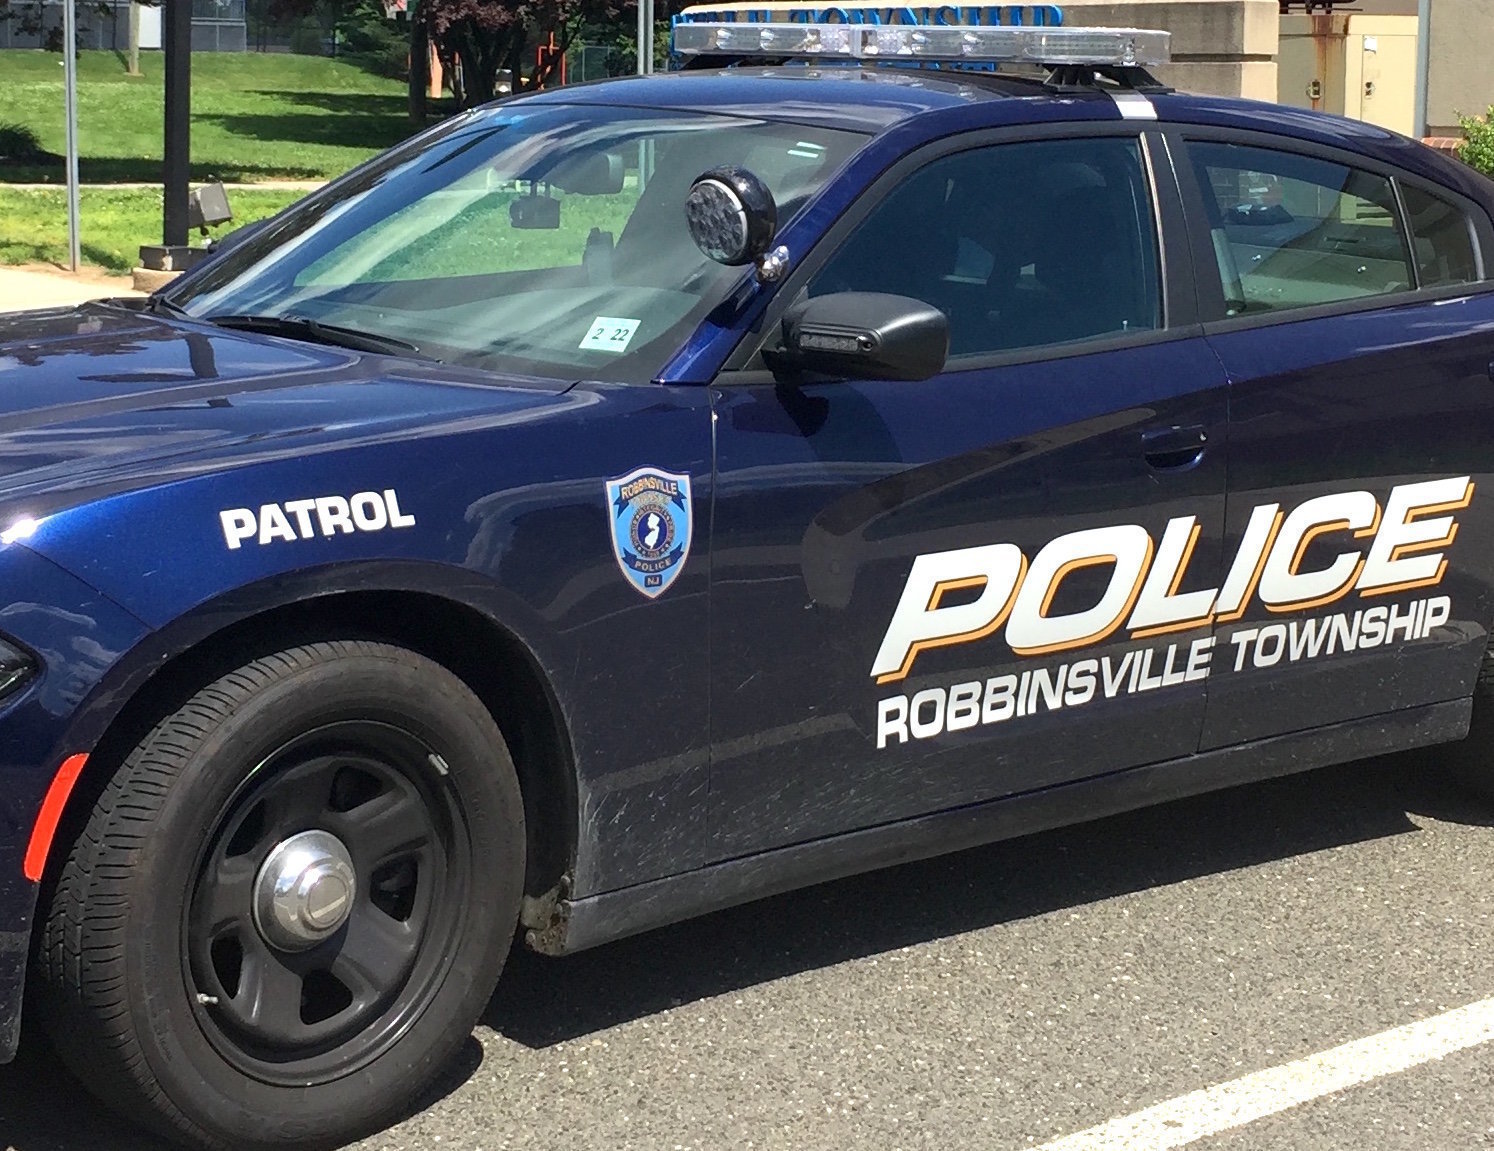 Facing a DUI Charge in Robbinsville New Jersey